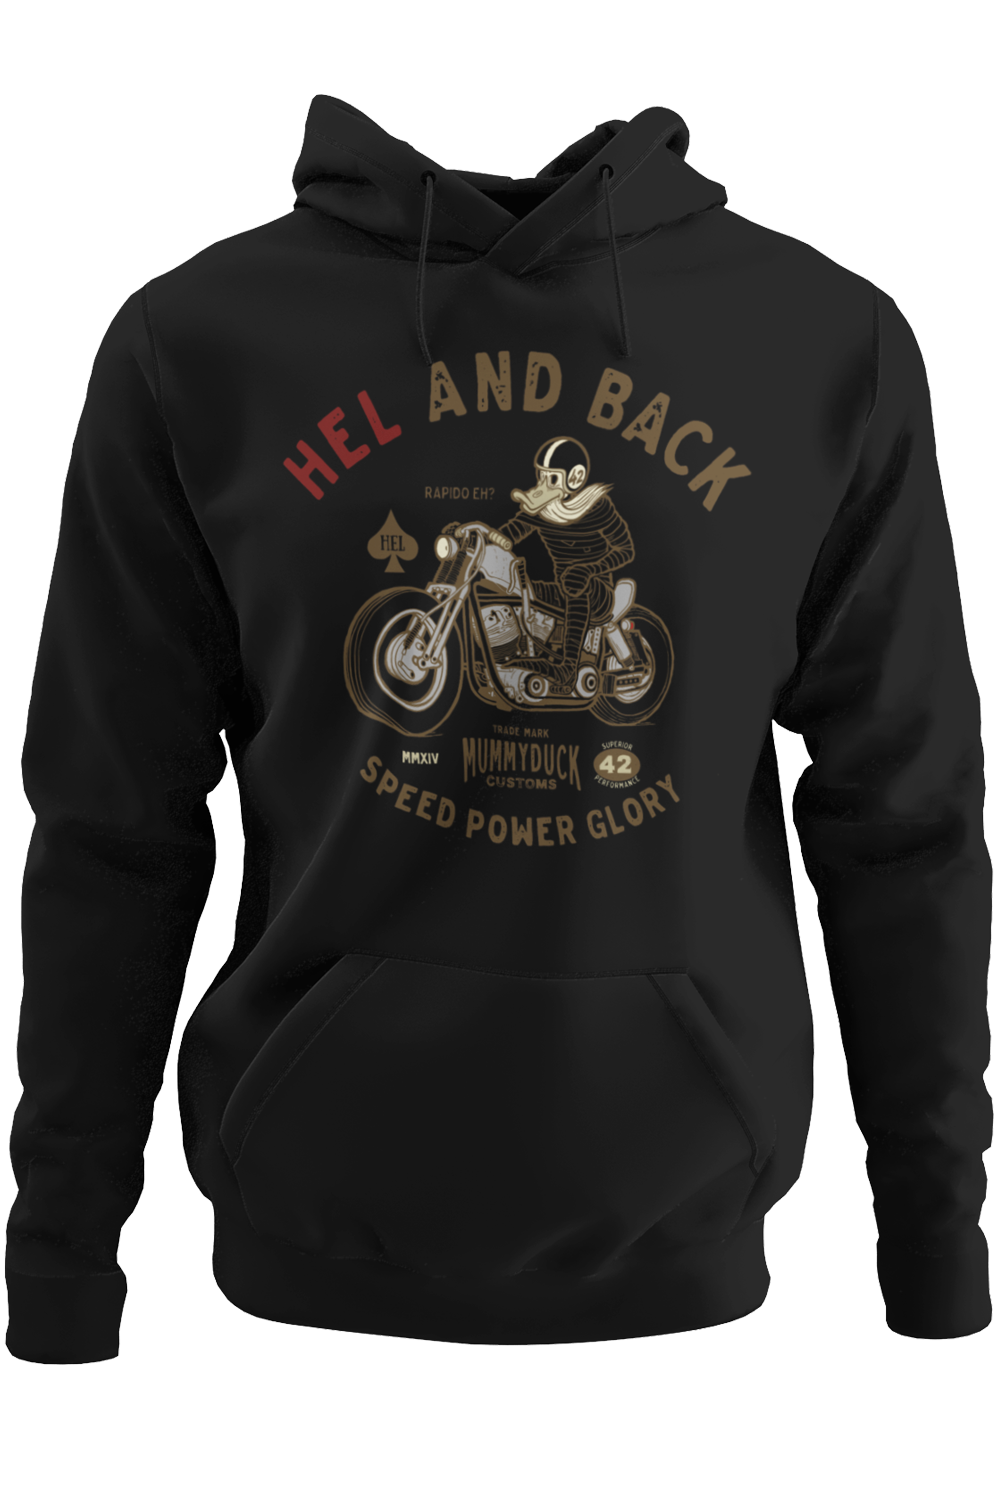 Mummy rider with his HD. He bows power and speed. He’s fast if needed. Otherwise, he just rides HEL and back if he pleases.  Everyone needs a cozy go-to hoodie to curl up in, so go for one that's soft, smooth, and stylish. It's the perfect choice for cooler evenings!